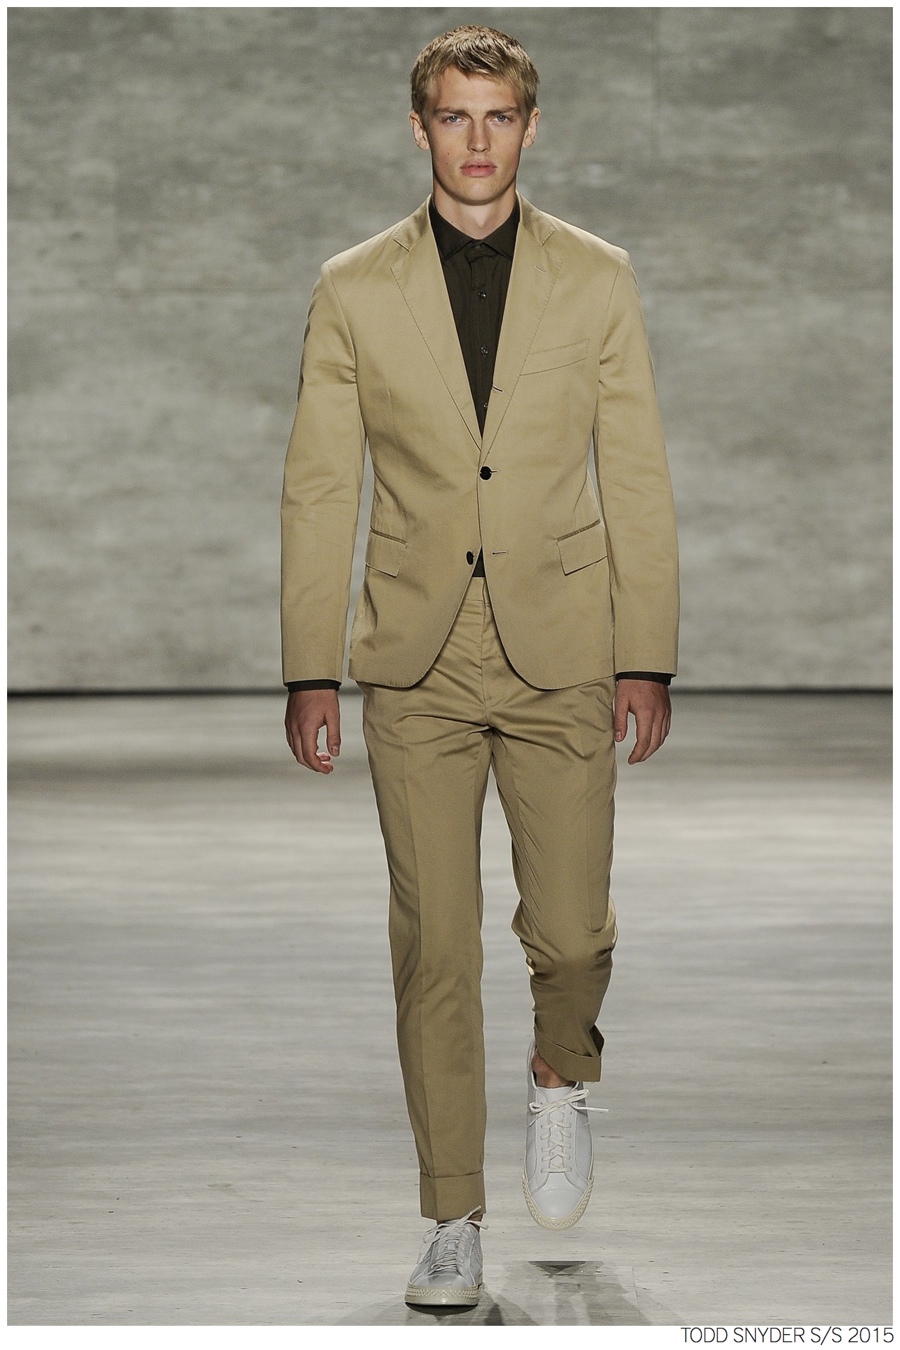 Todd Snyder Unveils Relaxed Spring/Summer 2015 Collection | The Fashionisto